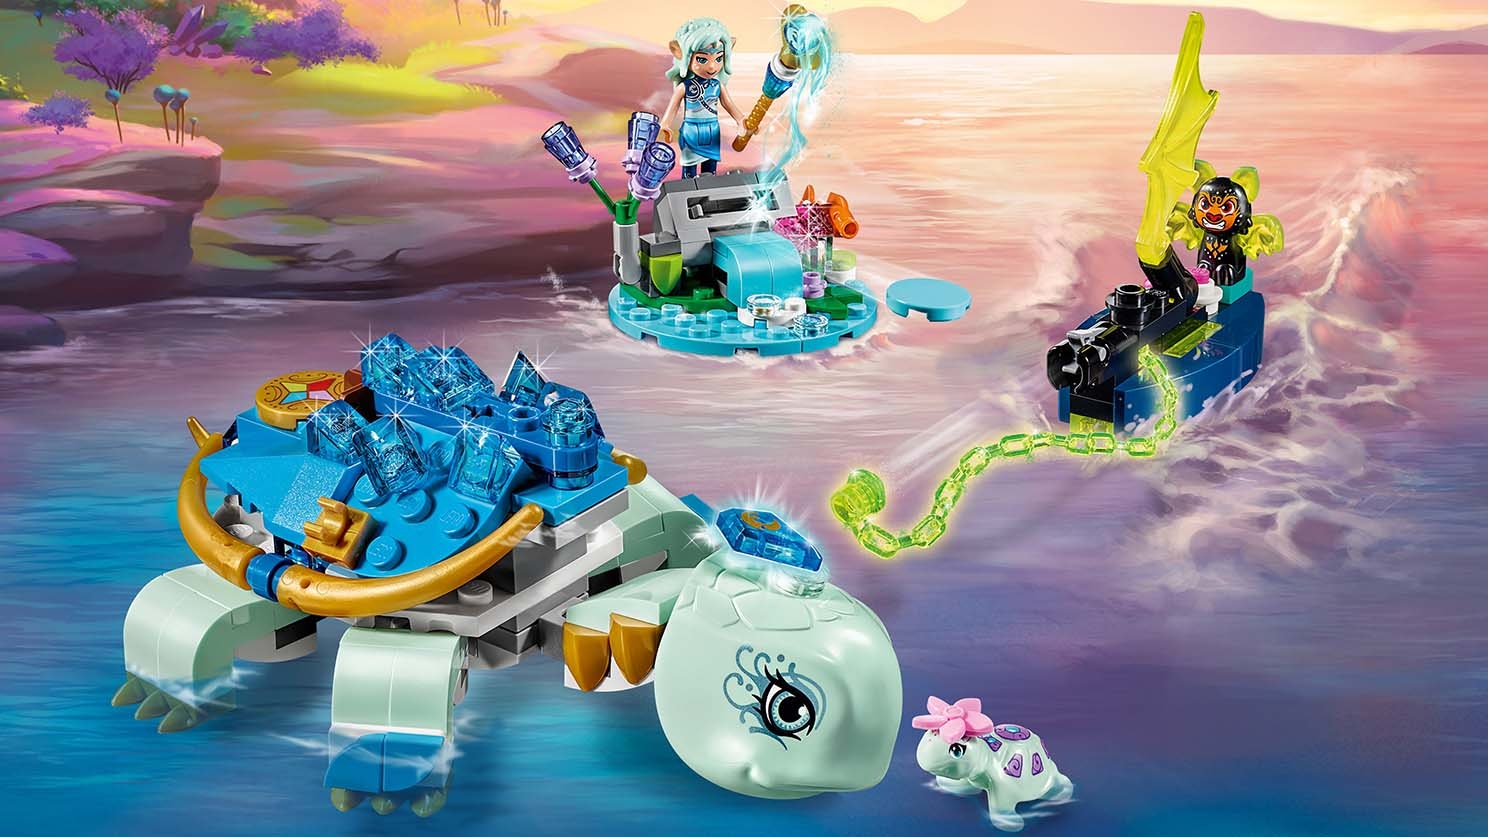 LEGO Elves - 41191 Naida & the Water Turtle Ambush - The shadow bat fires an evil chain at Cory the Guardian Water Turtle in an attempt to steal the magical Water diamond and Naida must use her powers to help Cory and the baby turtle.